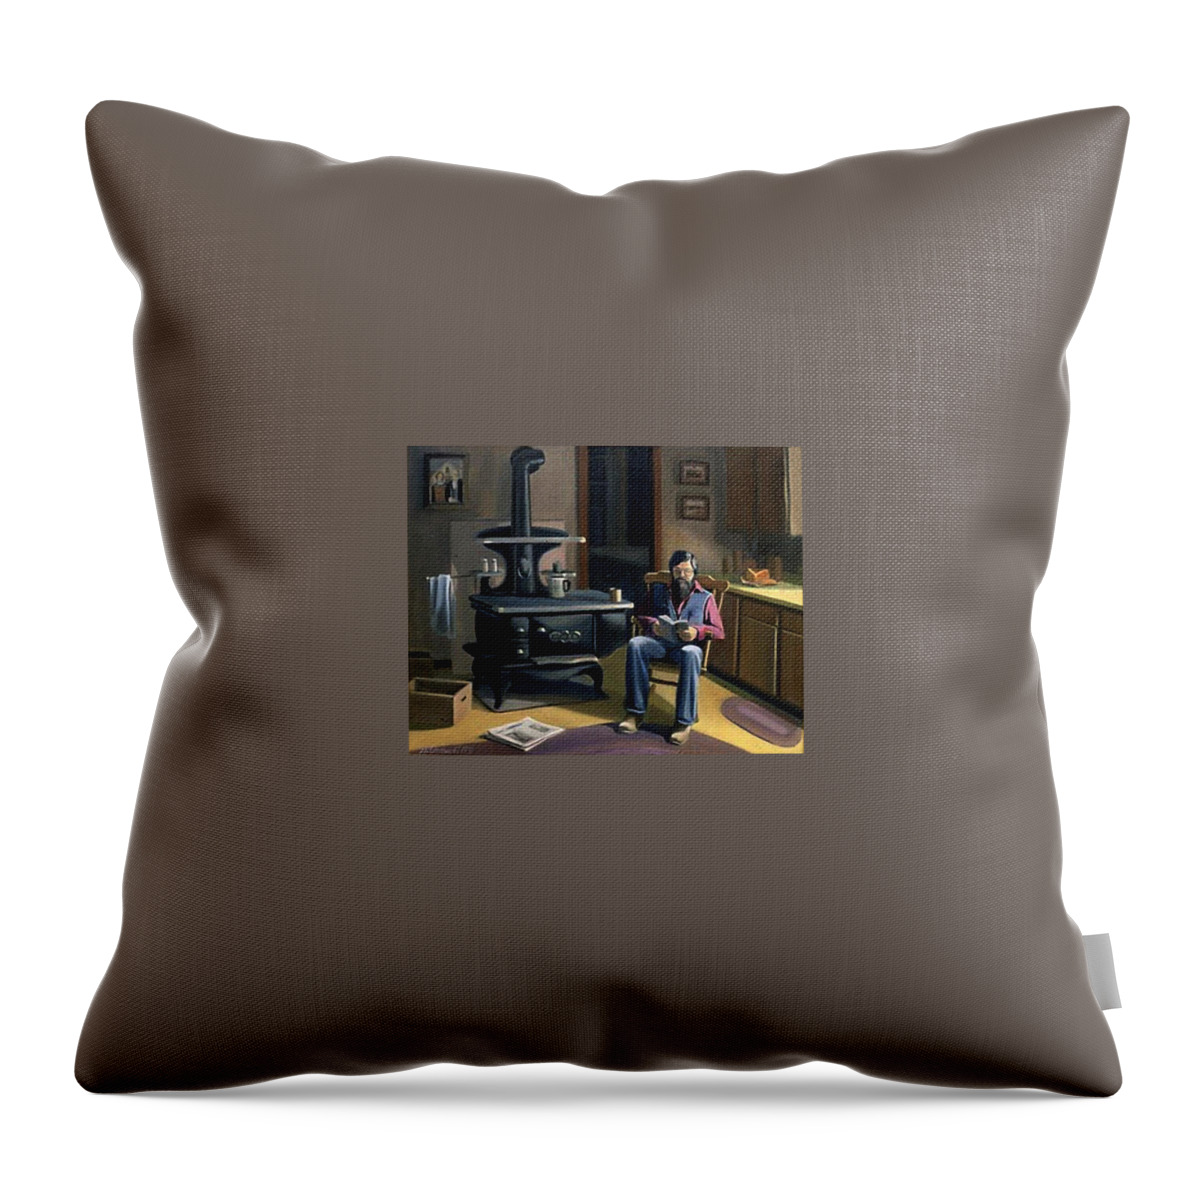 Card Throw Pillow featuring the painting Reading by the Light by Nancy Griswold